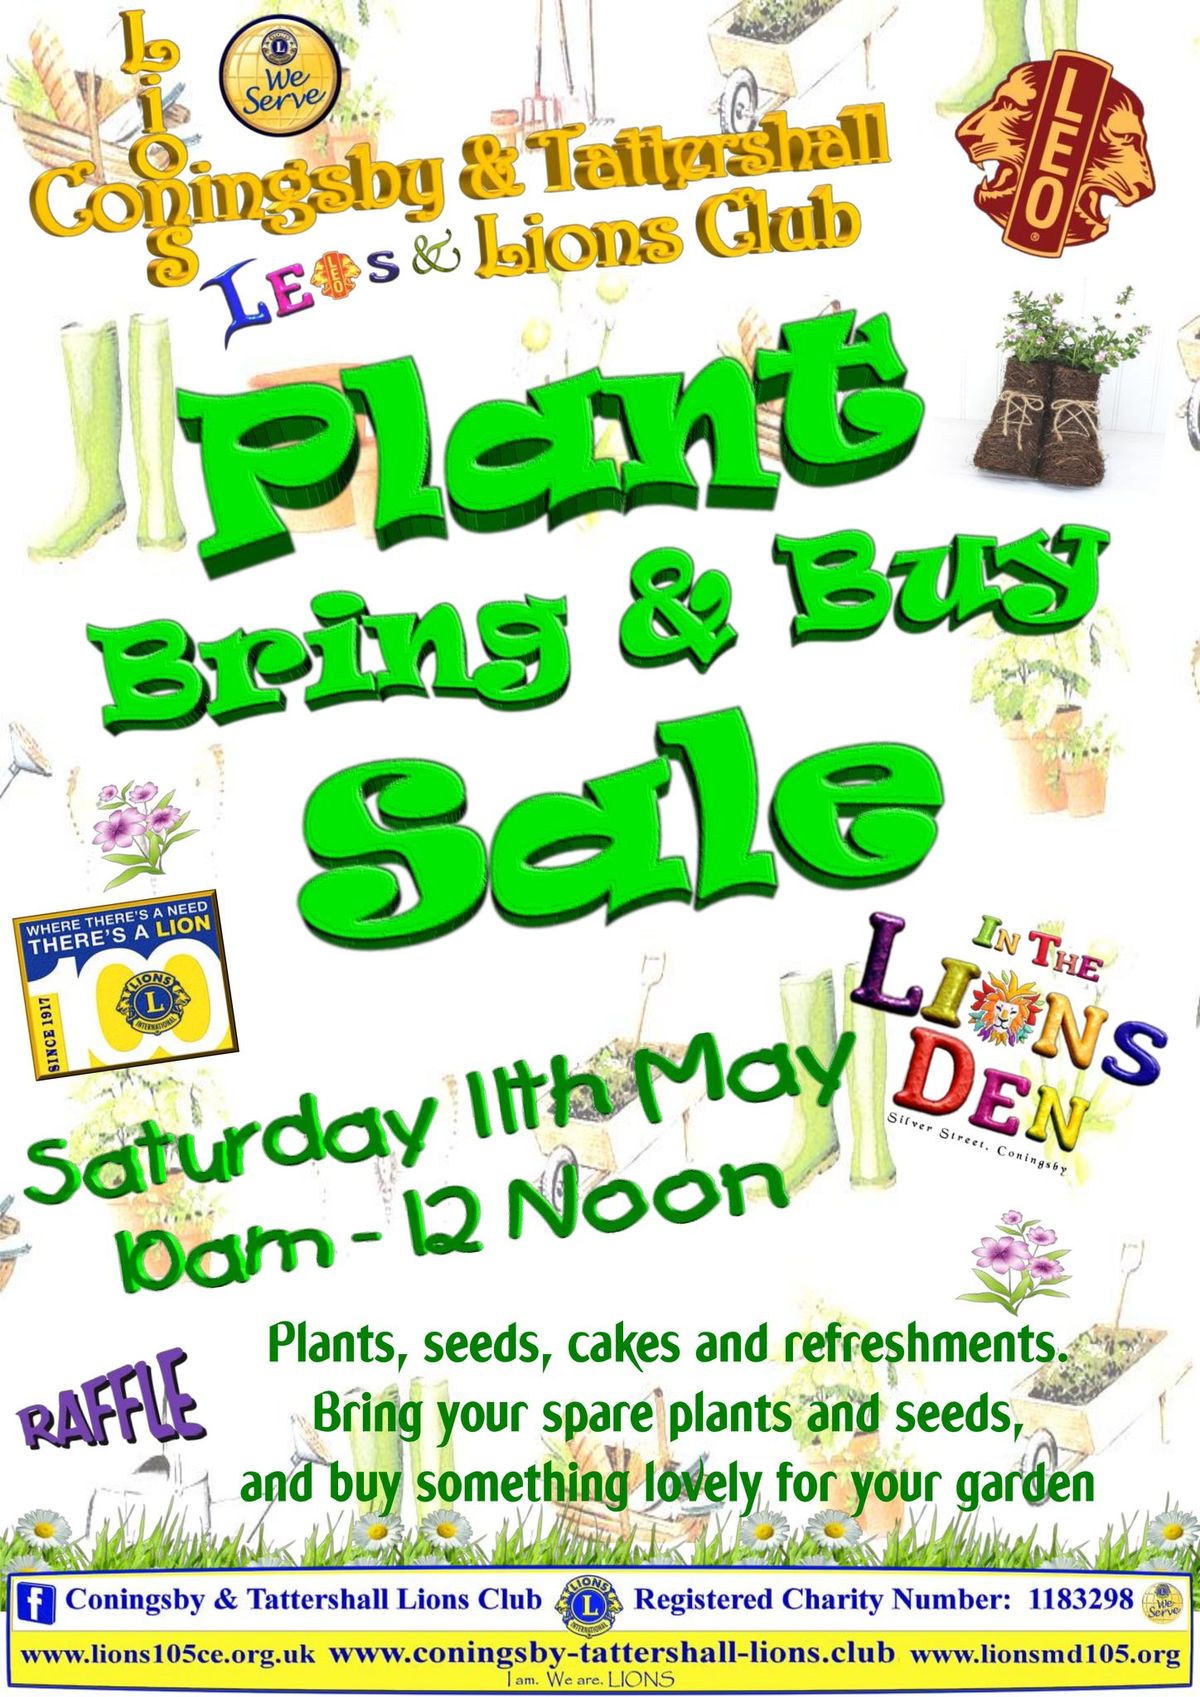 Coningsby & Tattershall Lions Plant sale